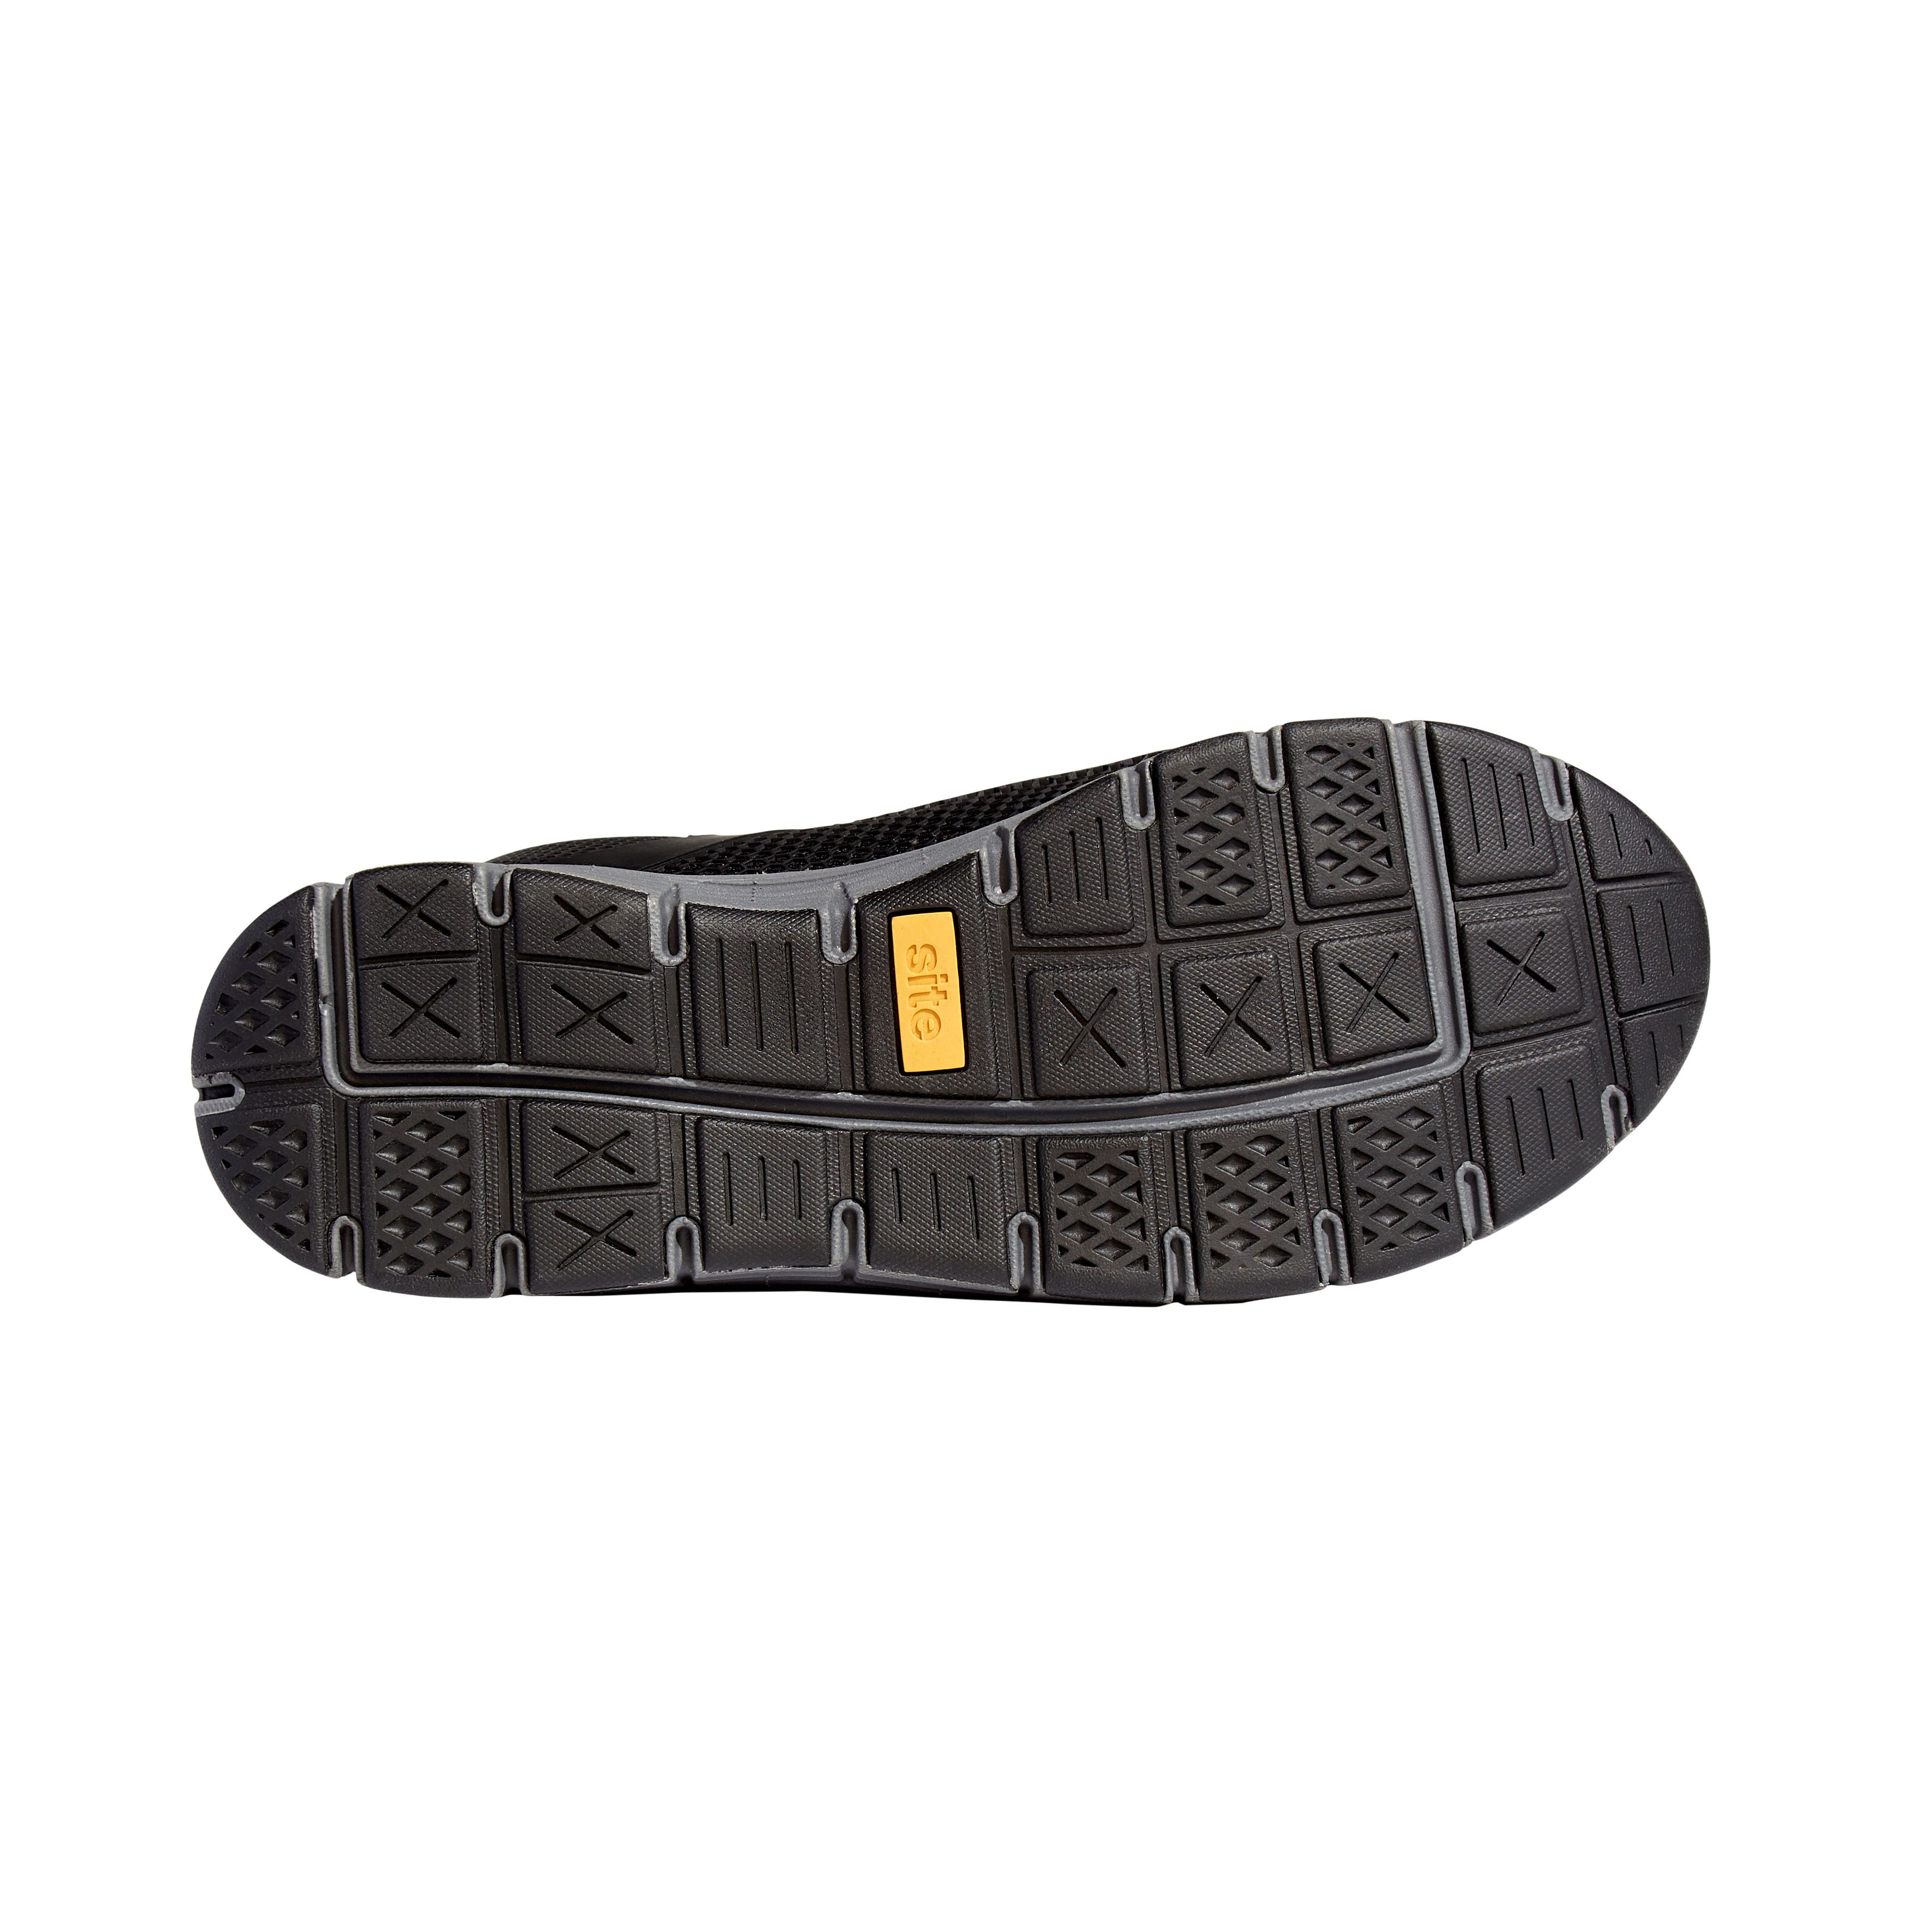 Site Donard Black Safety trainers, Size 11 | DIY at B&Q